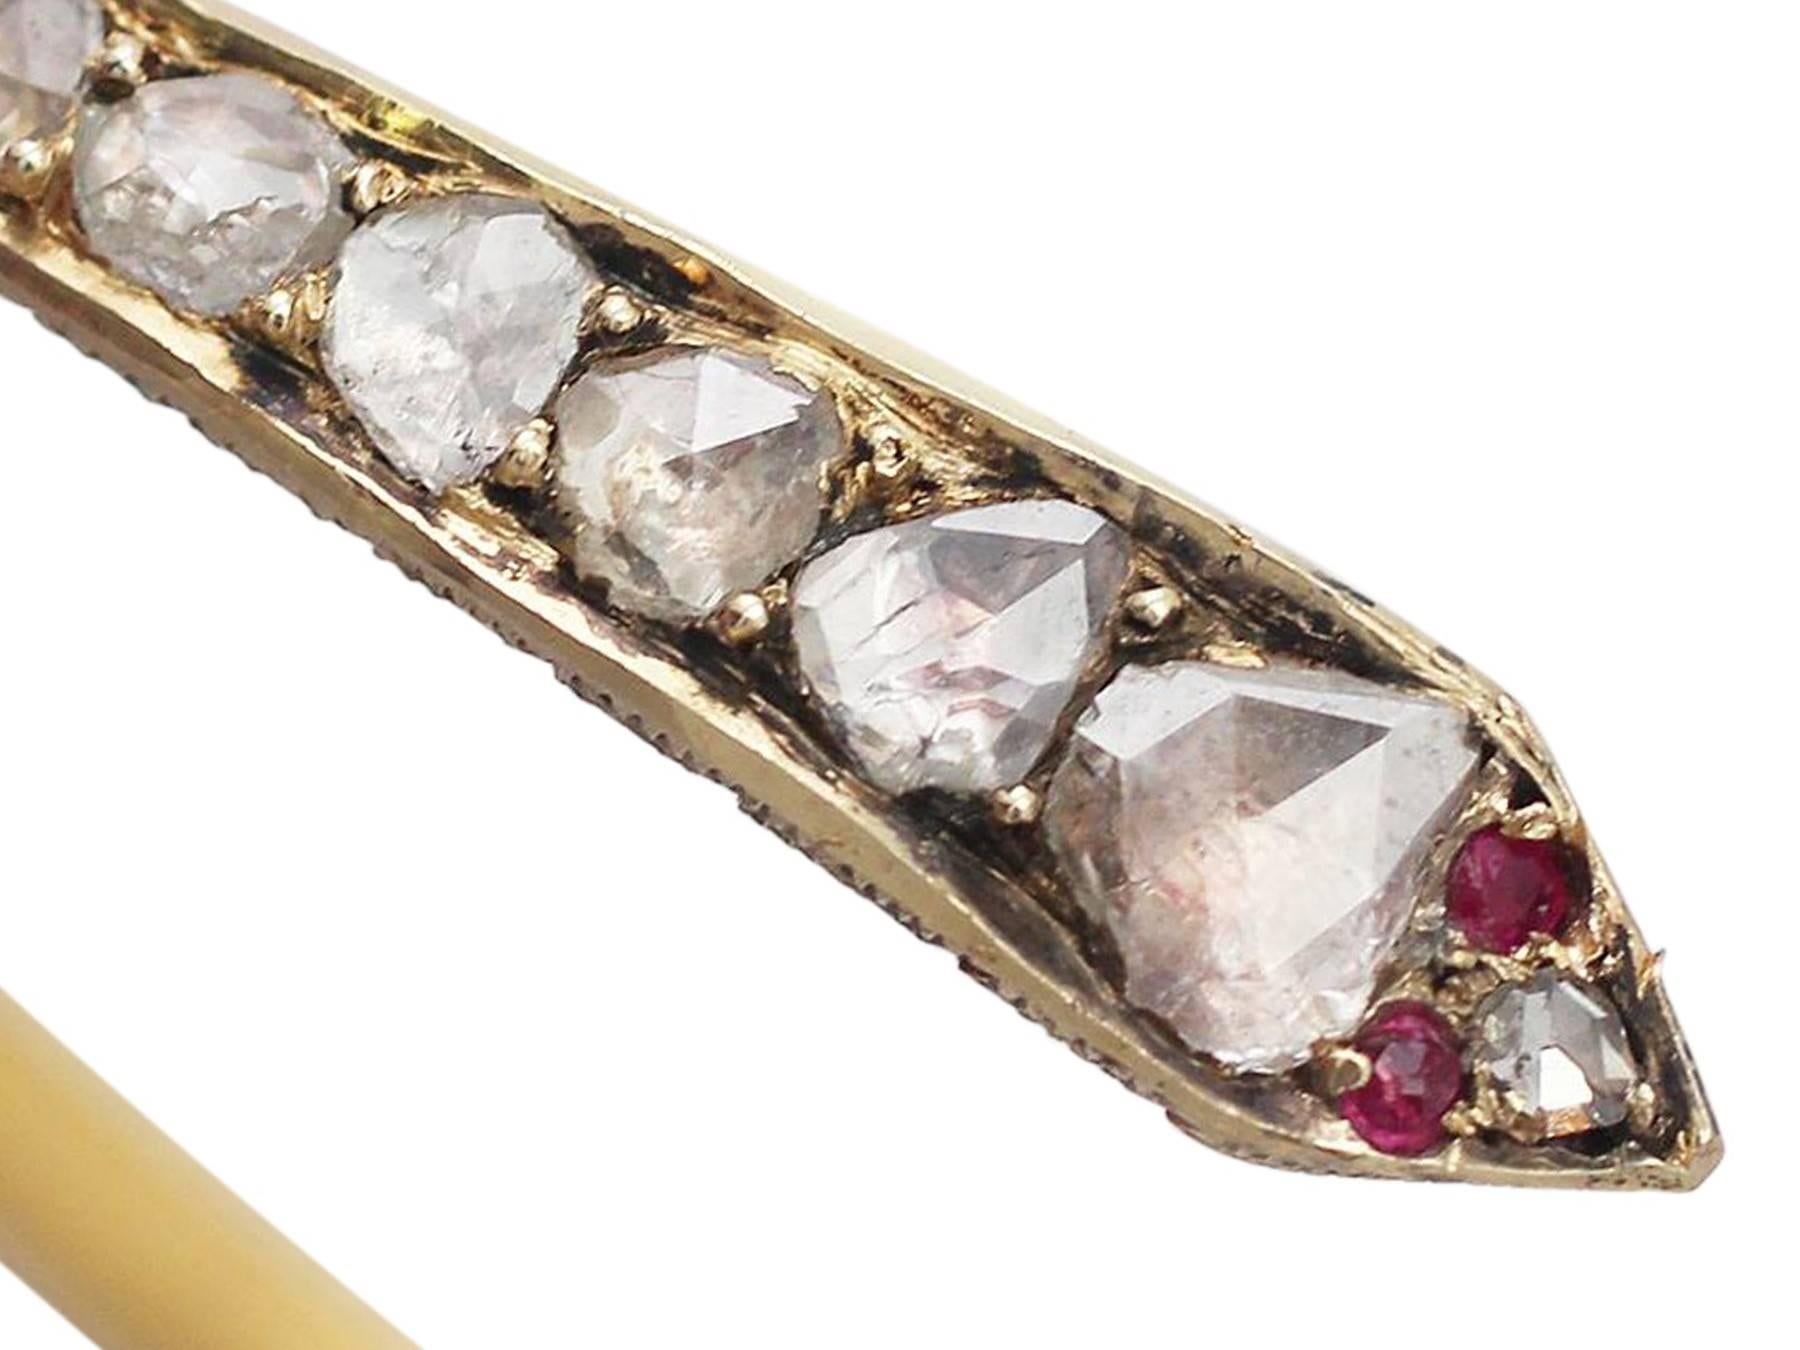 An exceptional antique Egyptian 2.05 carat diamond and 0.03 carat natural ruby, 22 karat yellow gold bangle/armlet in the form of a snake; an addition to our antique jewelry collections

This fine and impressive Egyptian bangle has been crafted in